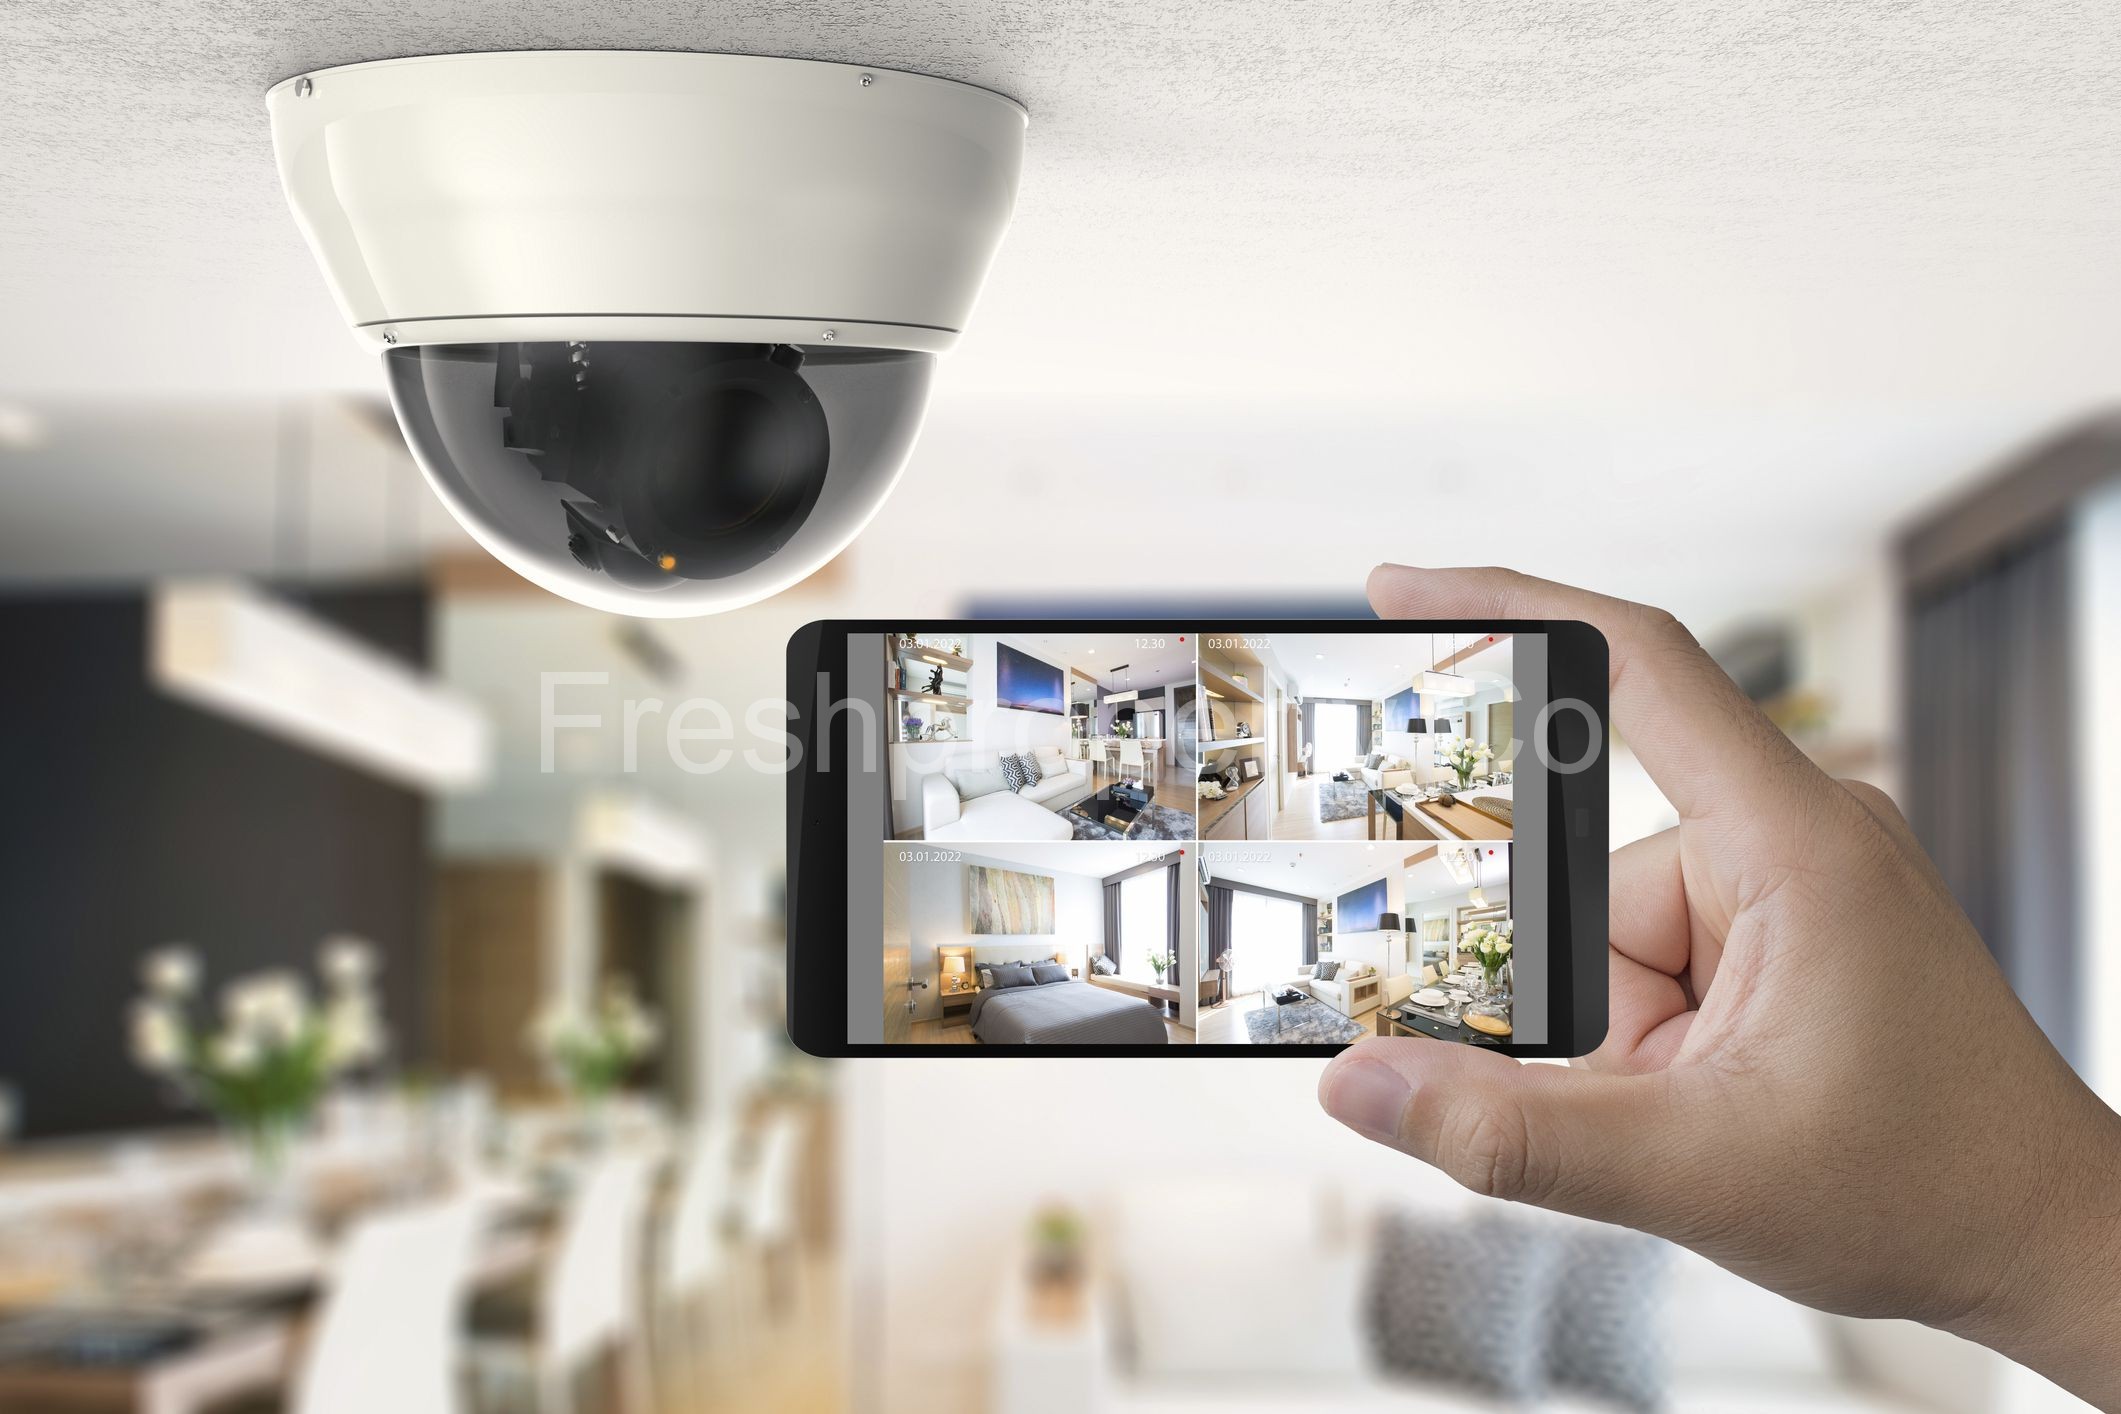 CCTV Cameras: The Issues of Privacy in Airbnb Homes